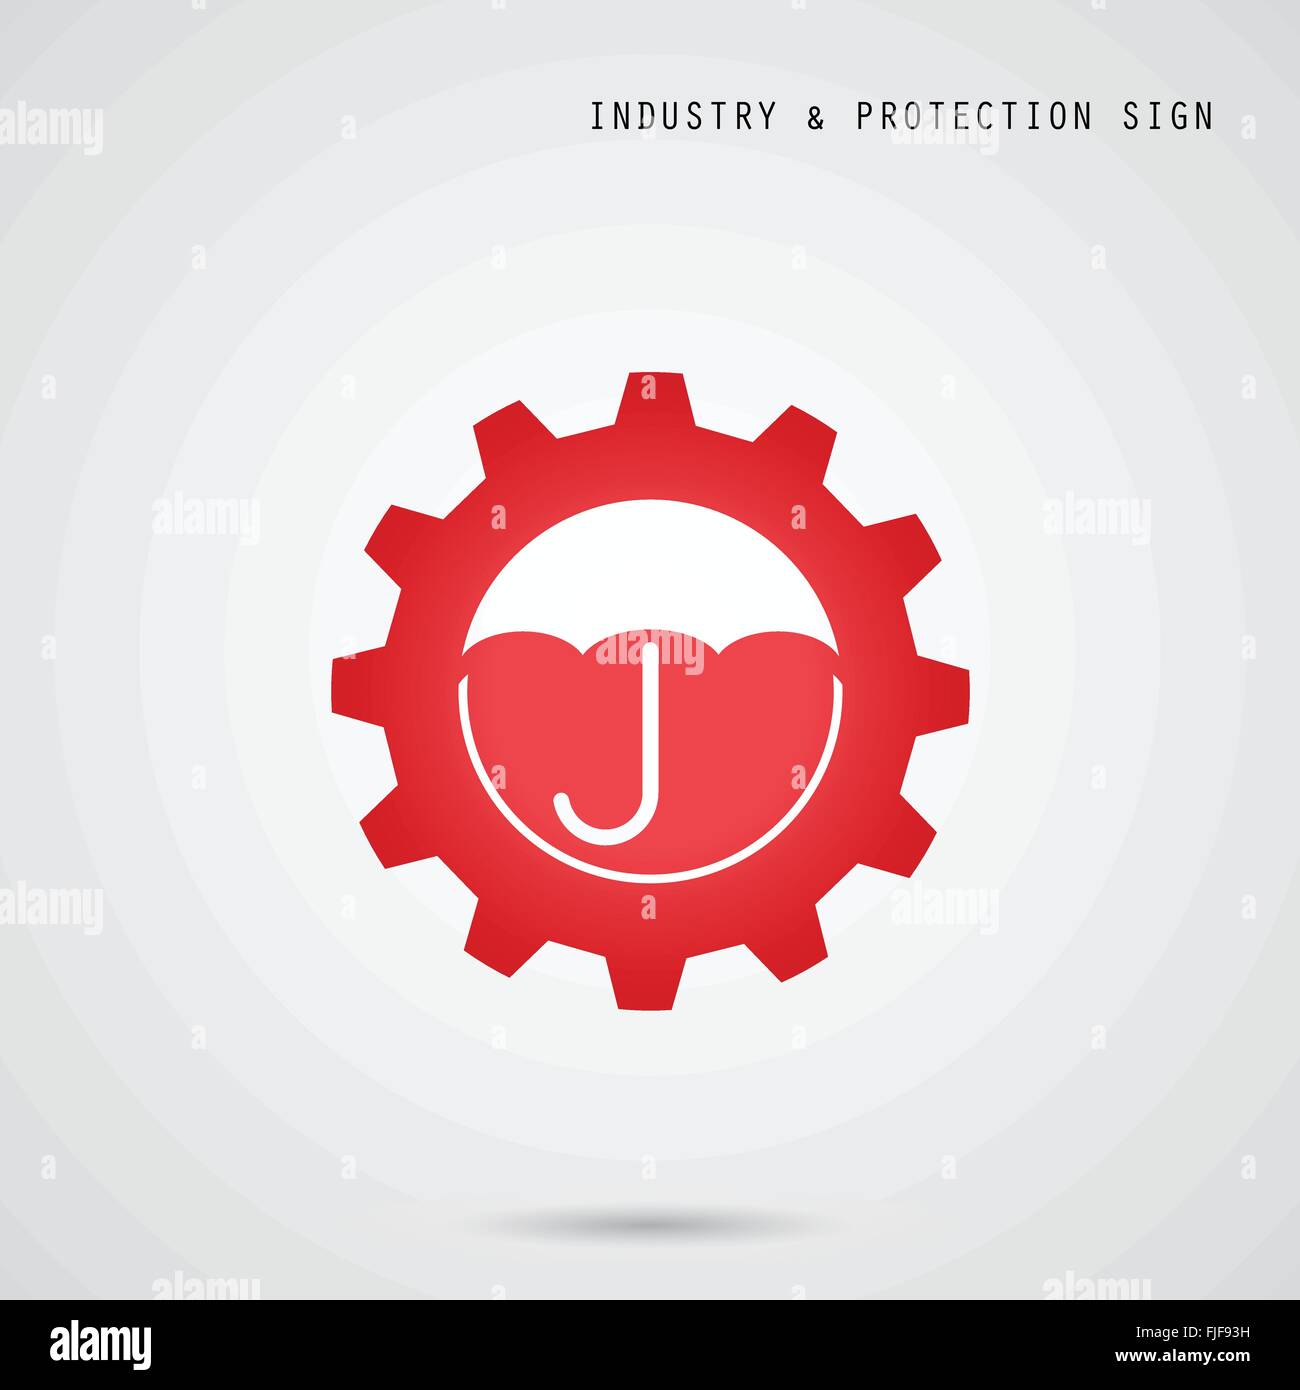 Umbrella sign and gear icon. Industry, protection and security concept. Vector illustration Stock Vector